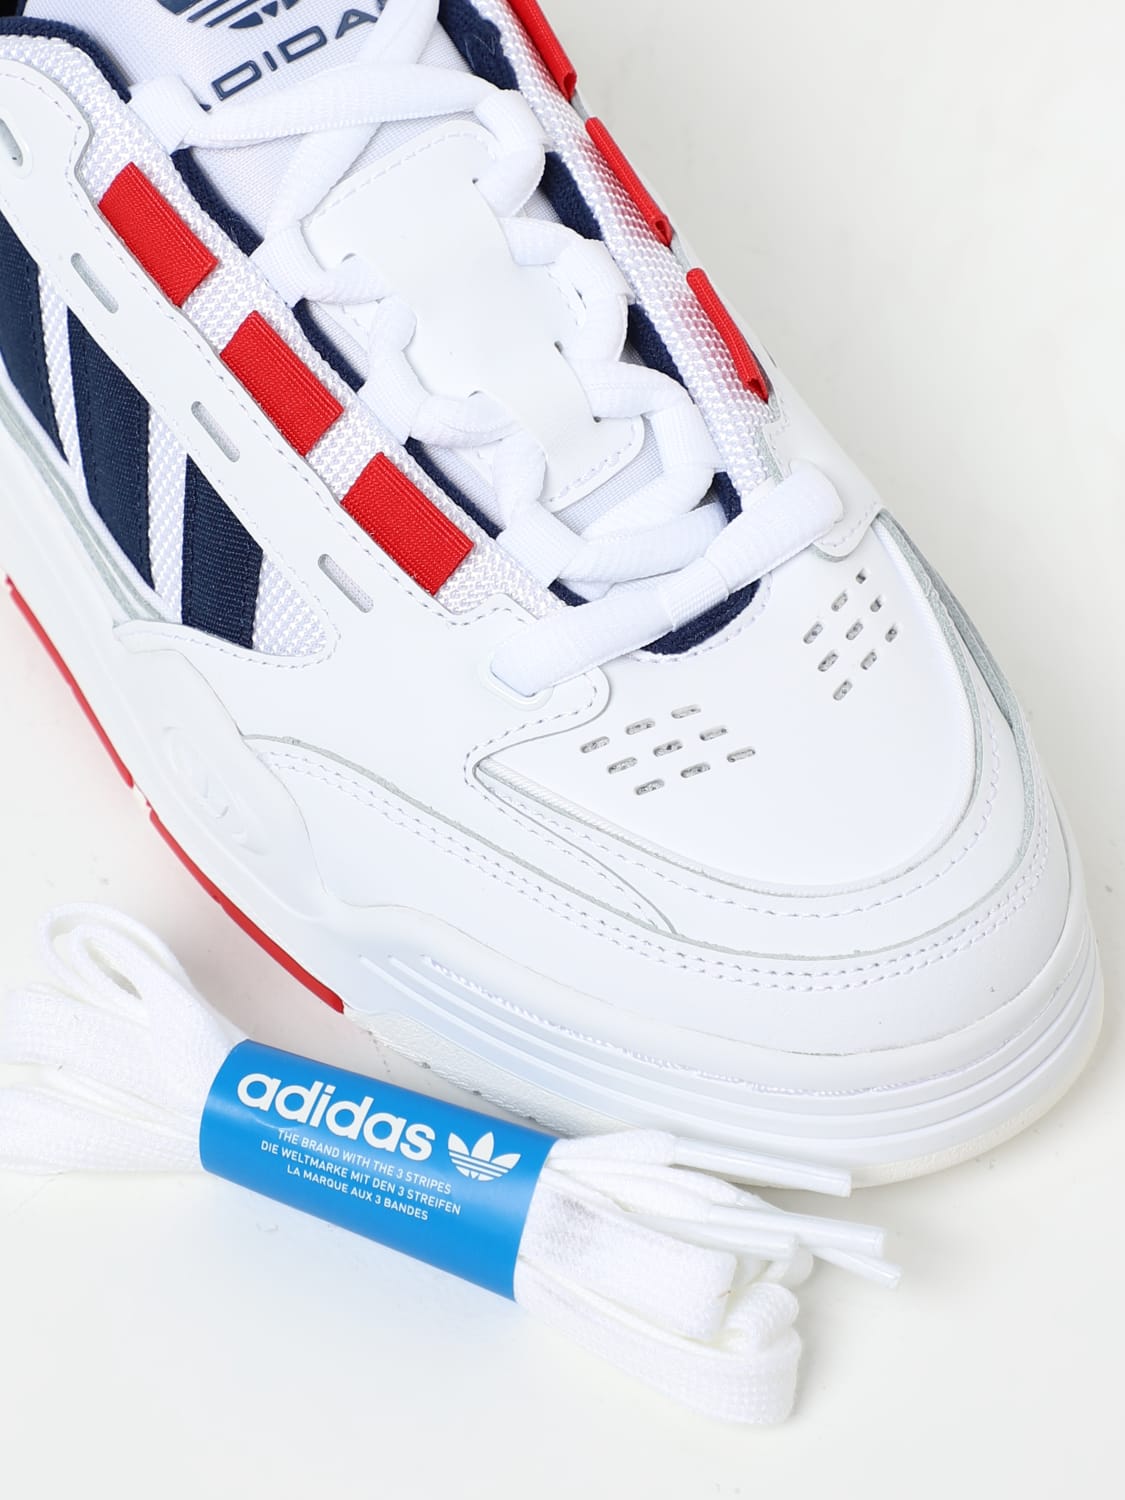 sneakers leather in | sneakers White online and at Adidas ADI2000 ADIDAS mesh ID2103 ORIGINALS: Originals -